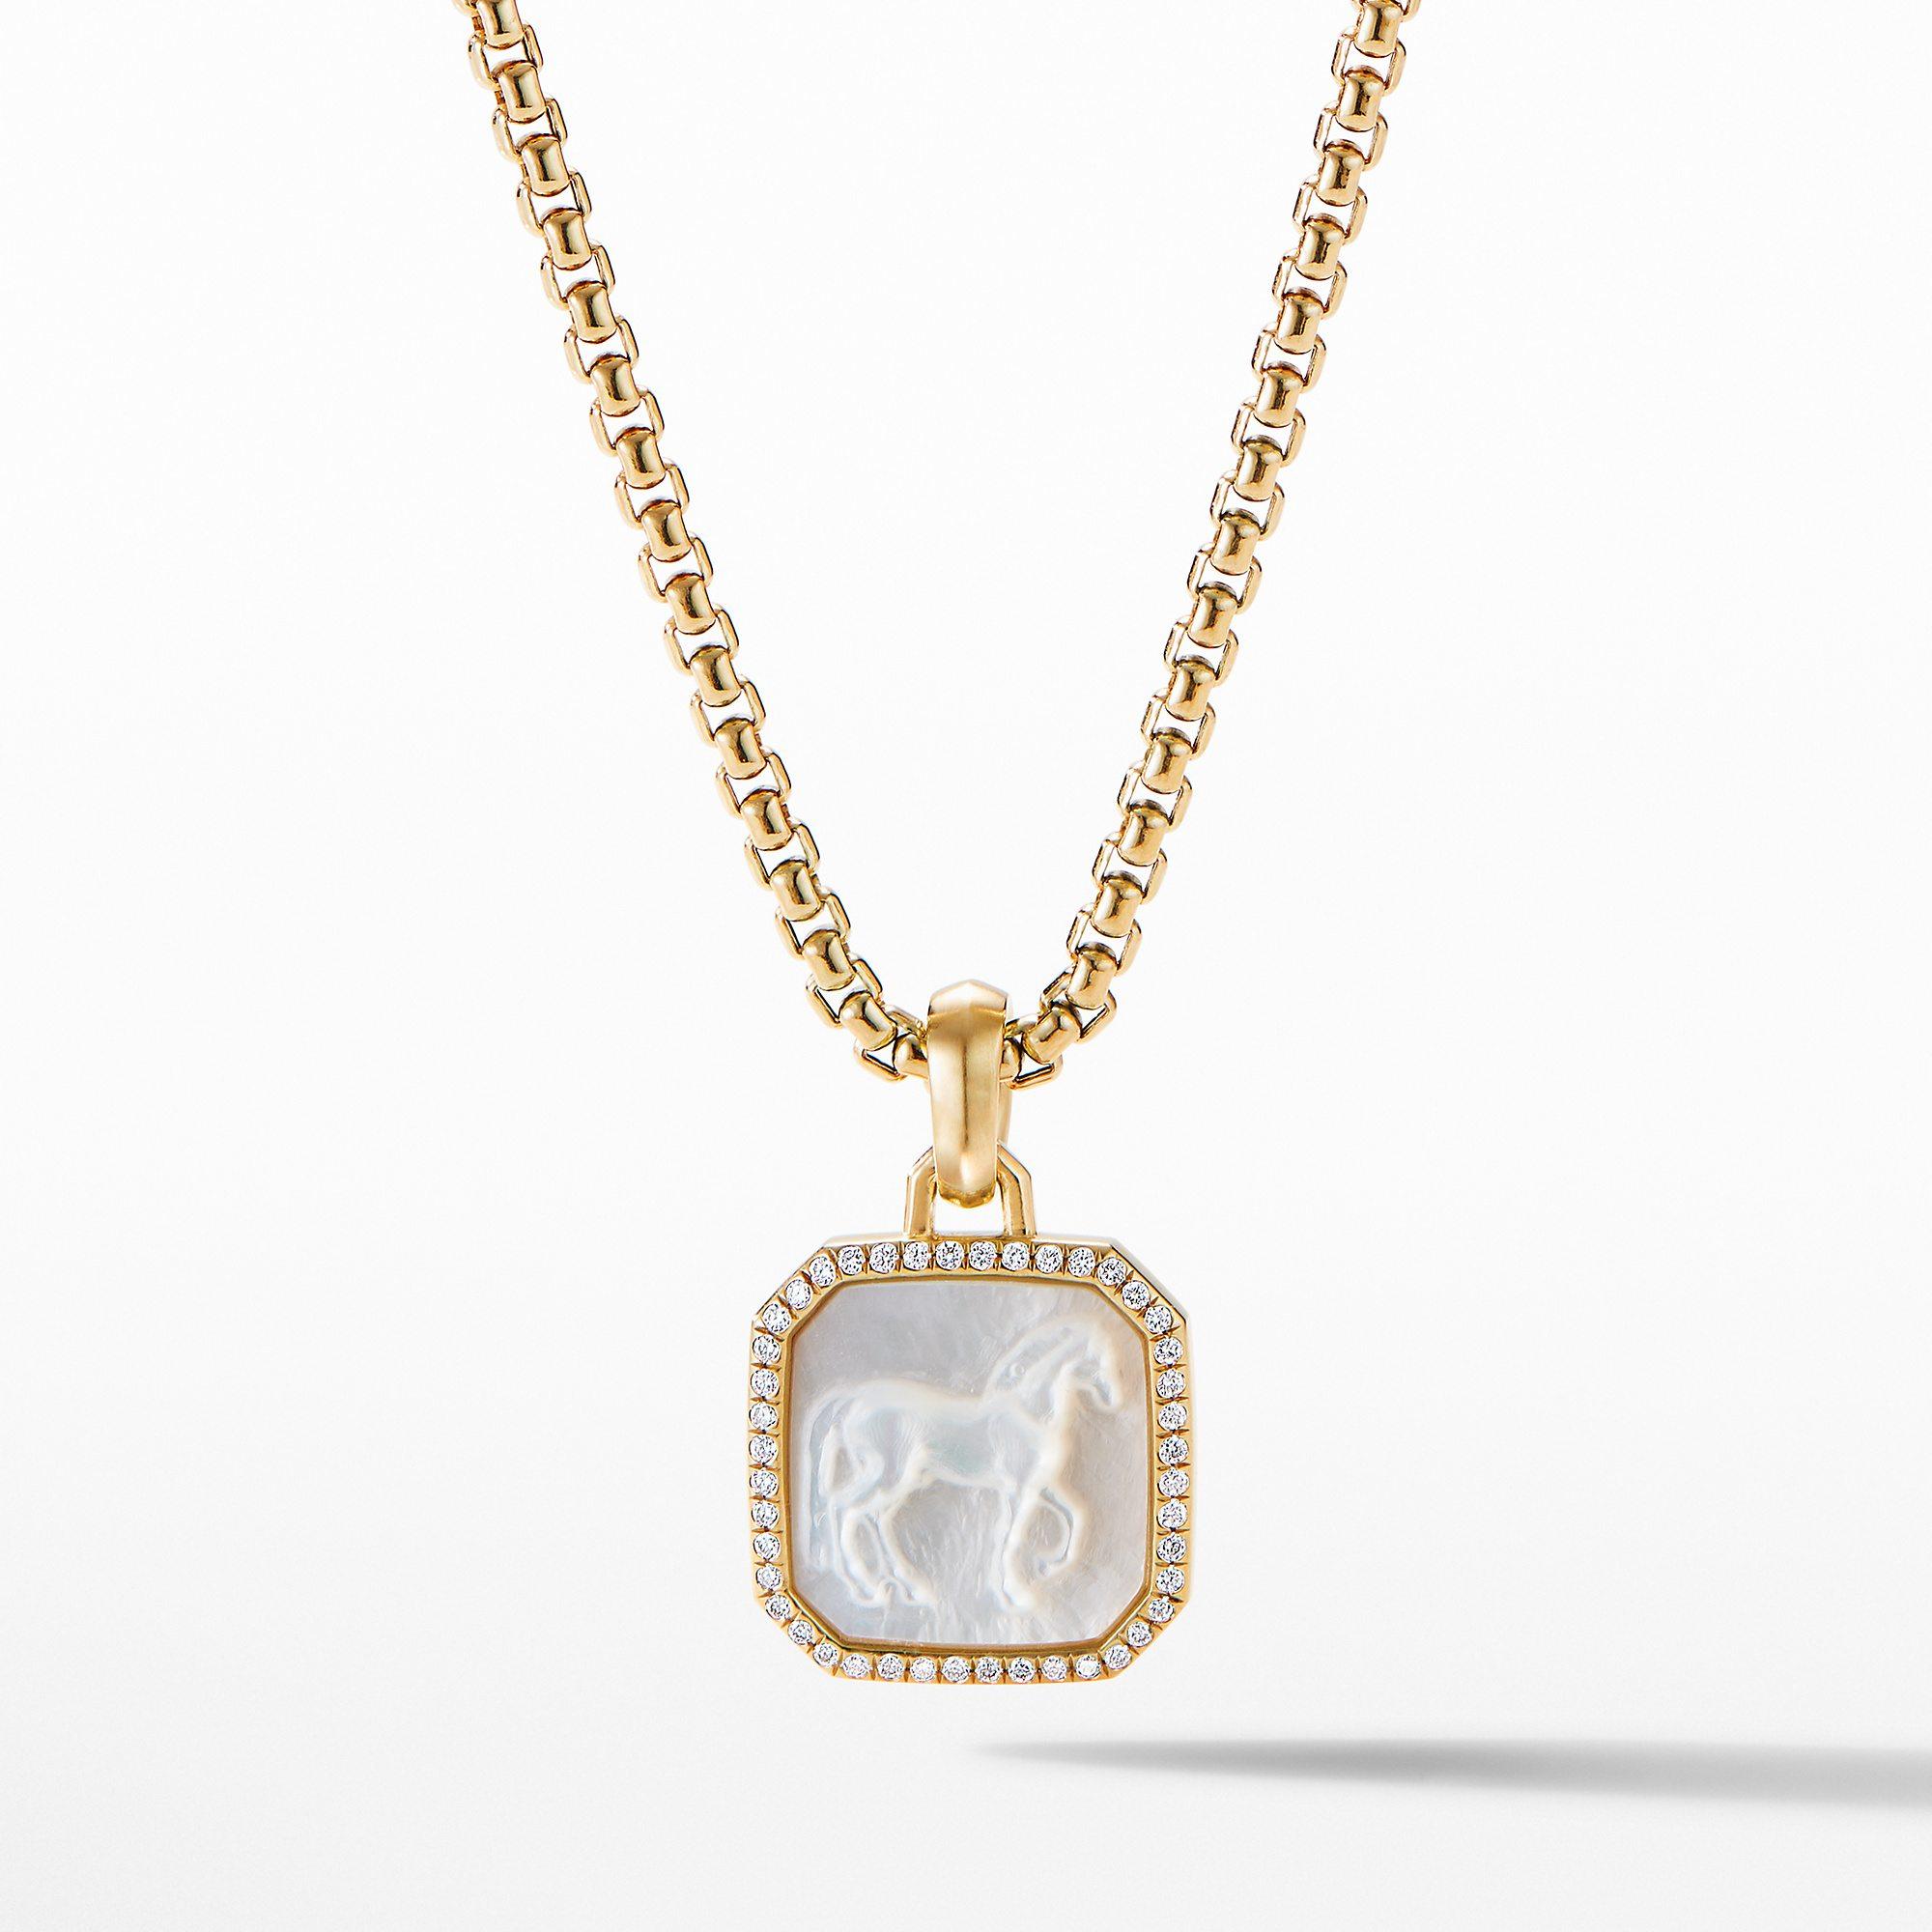 David Yurman Petrvs Horse Amulet in 18K Yellow Gold with Mother of Pearl and Pave Diamonds | Front View